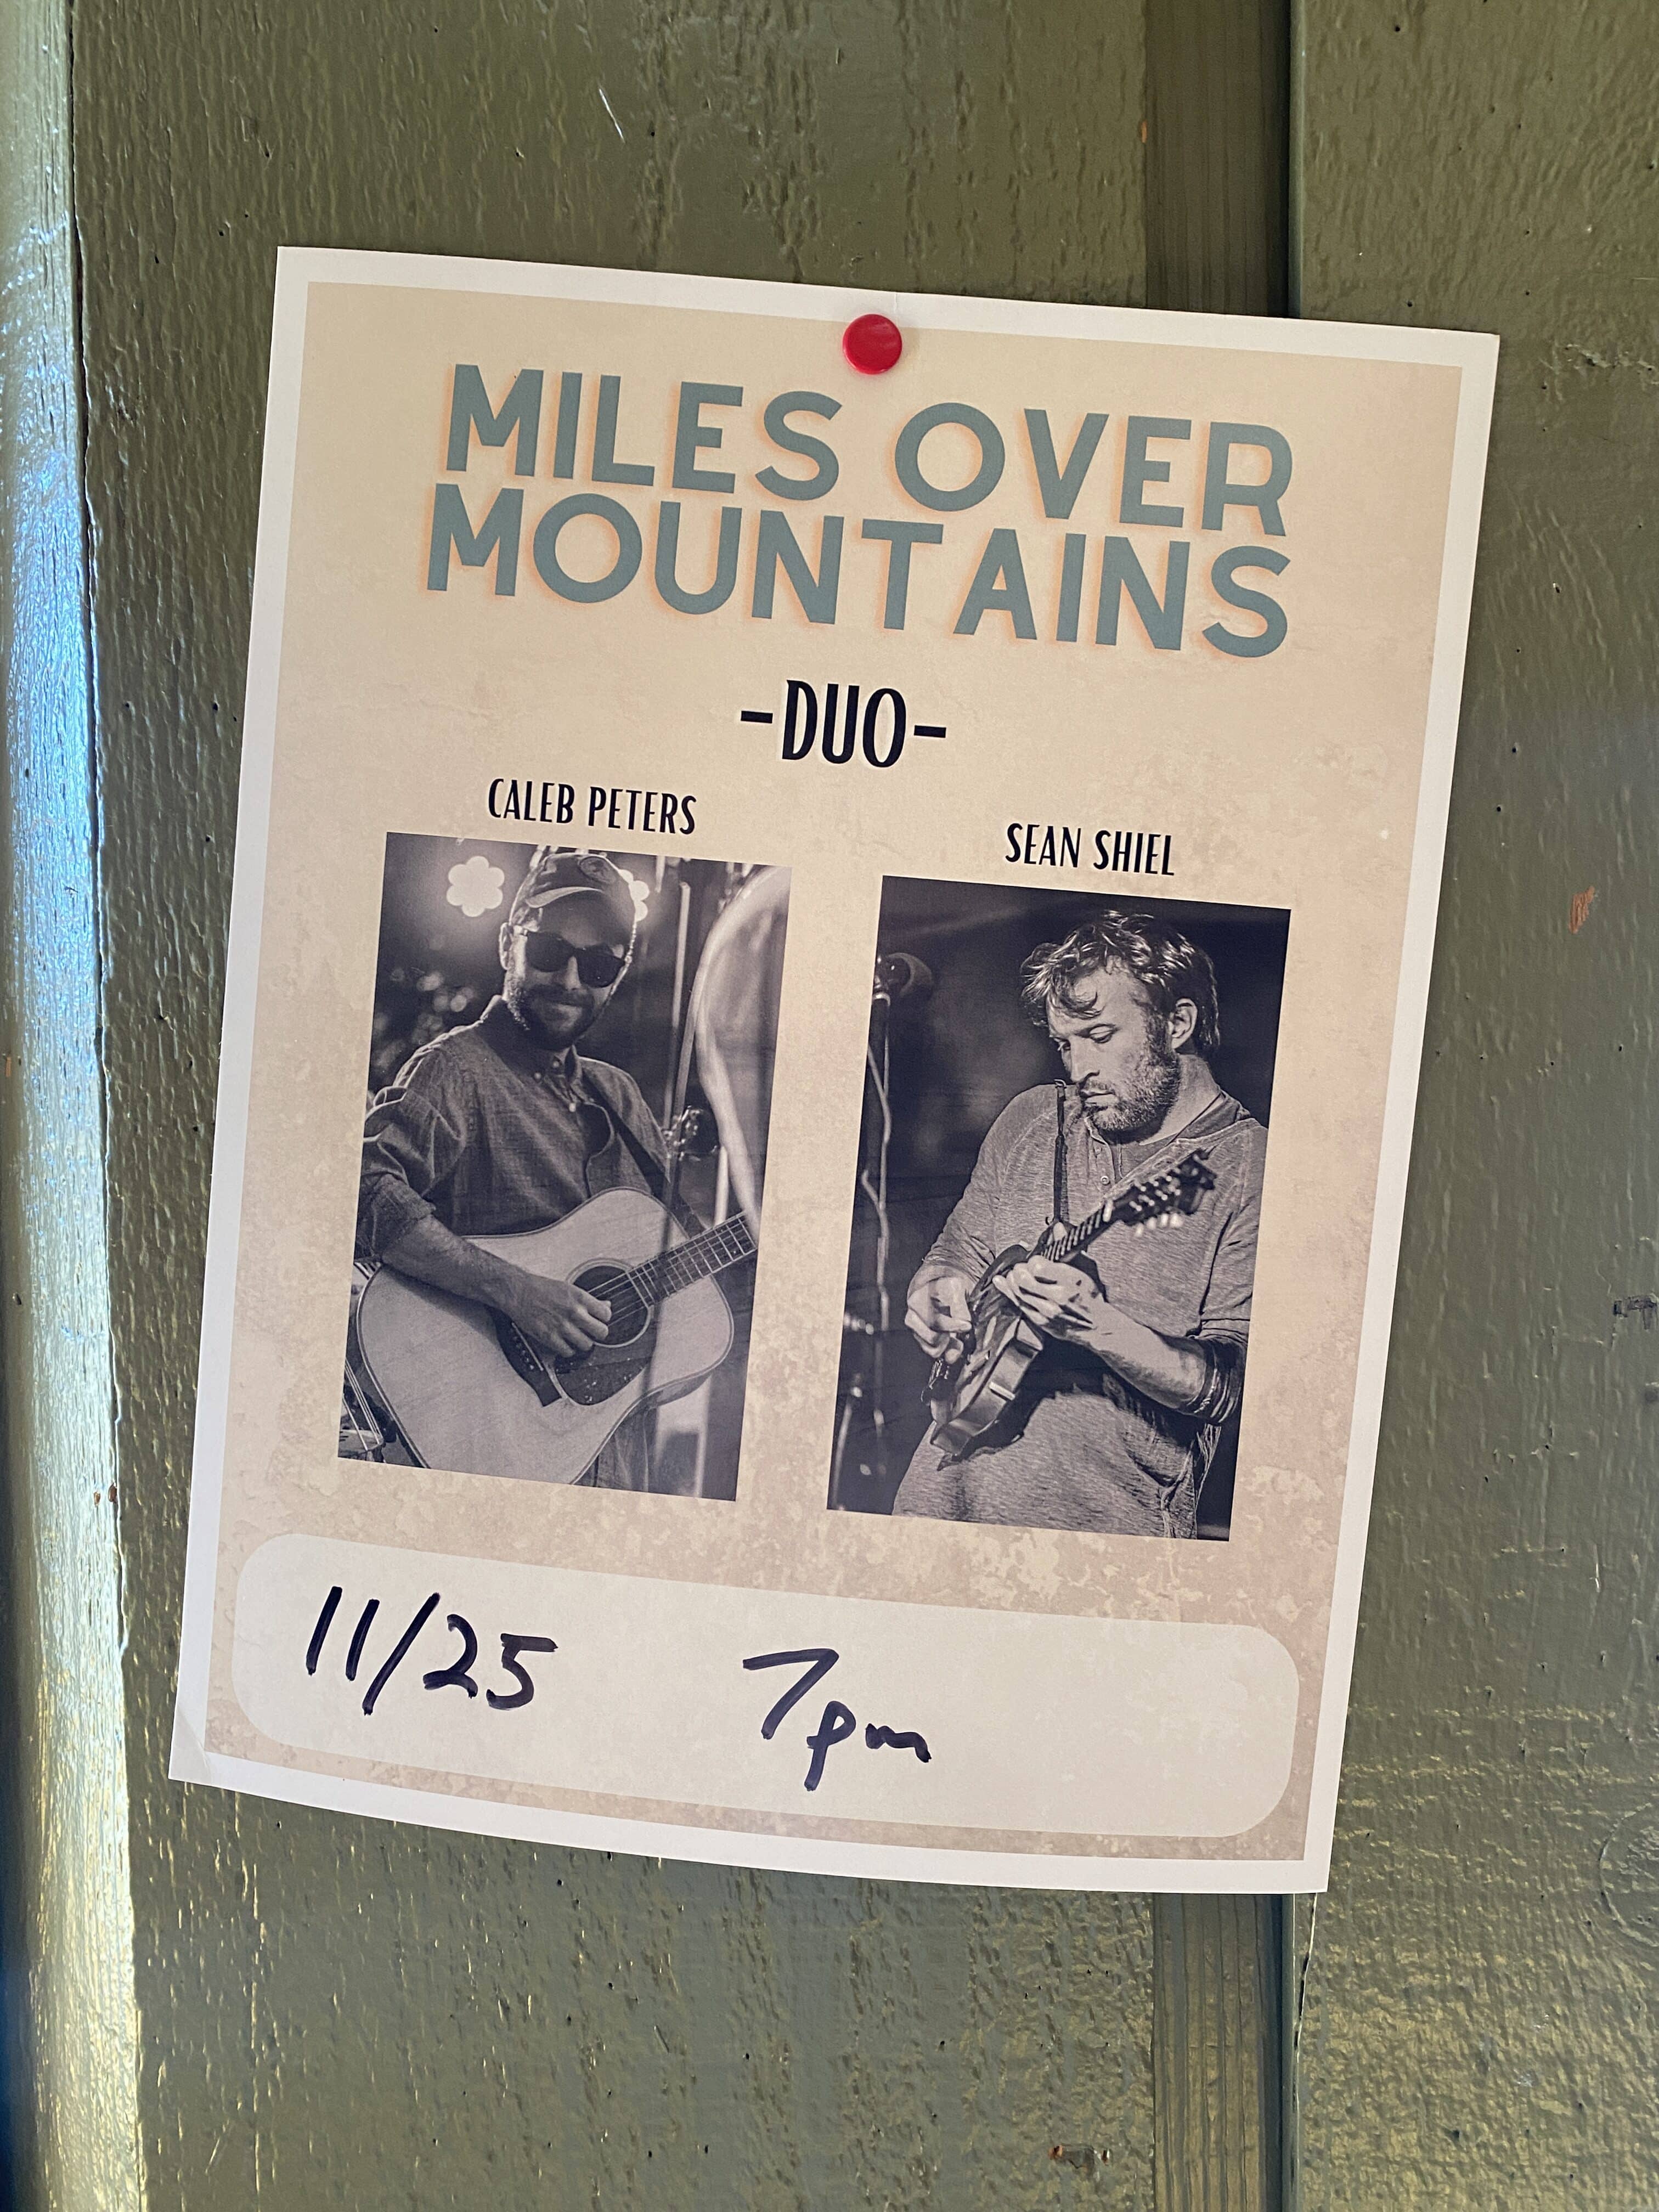 Live Music at Ortmann’s – Miles Over Mountains Bluegrass Duo